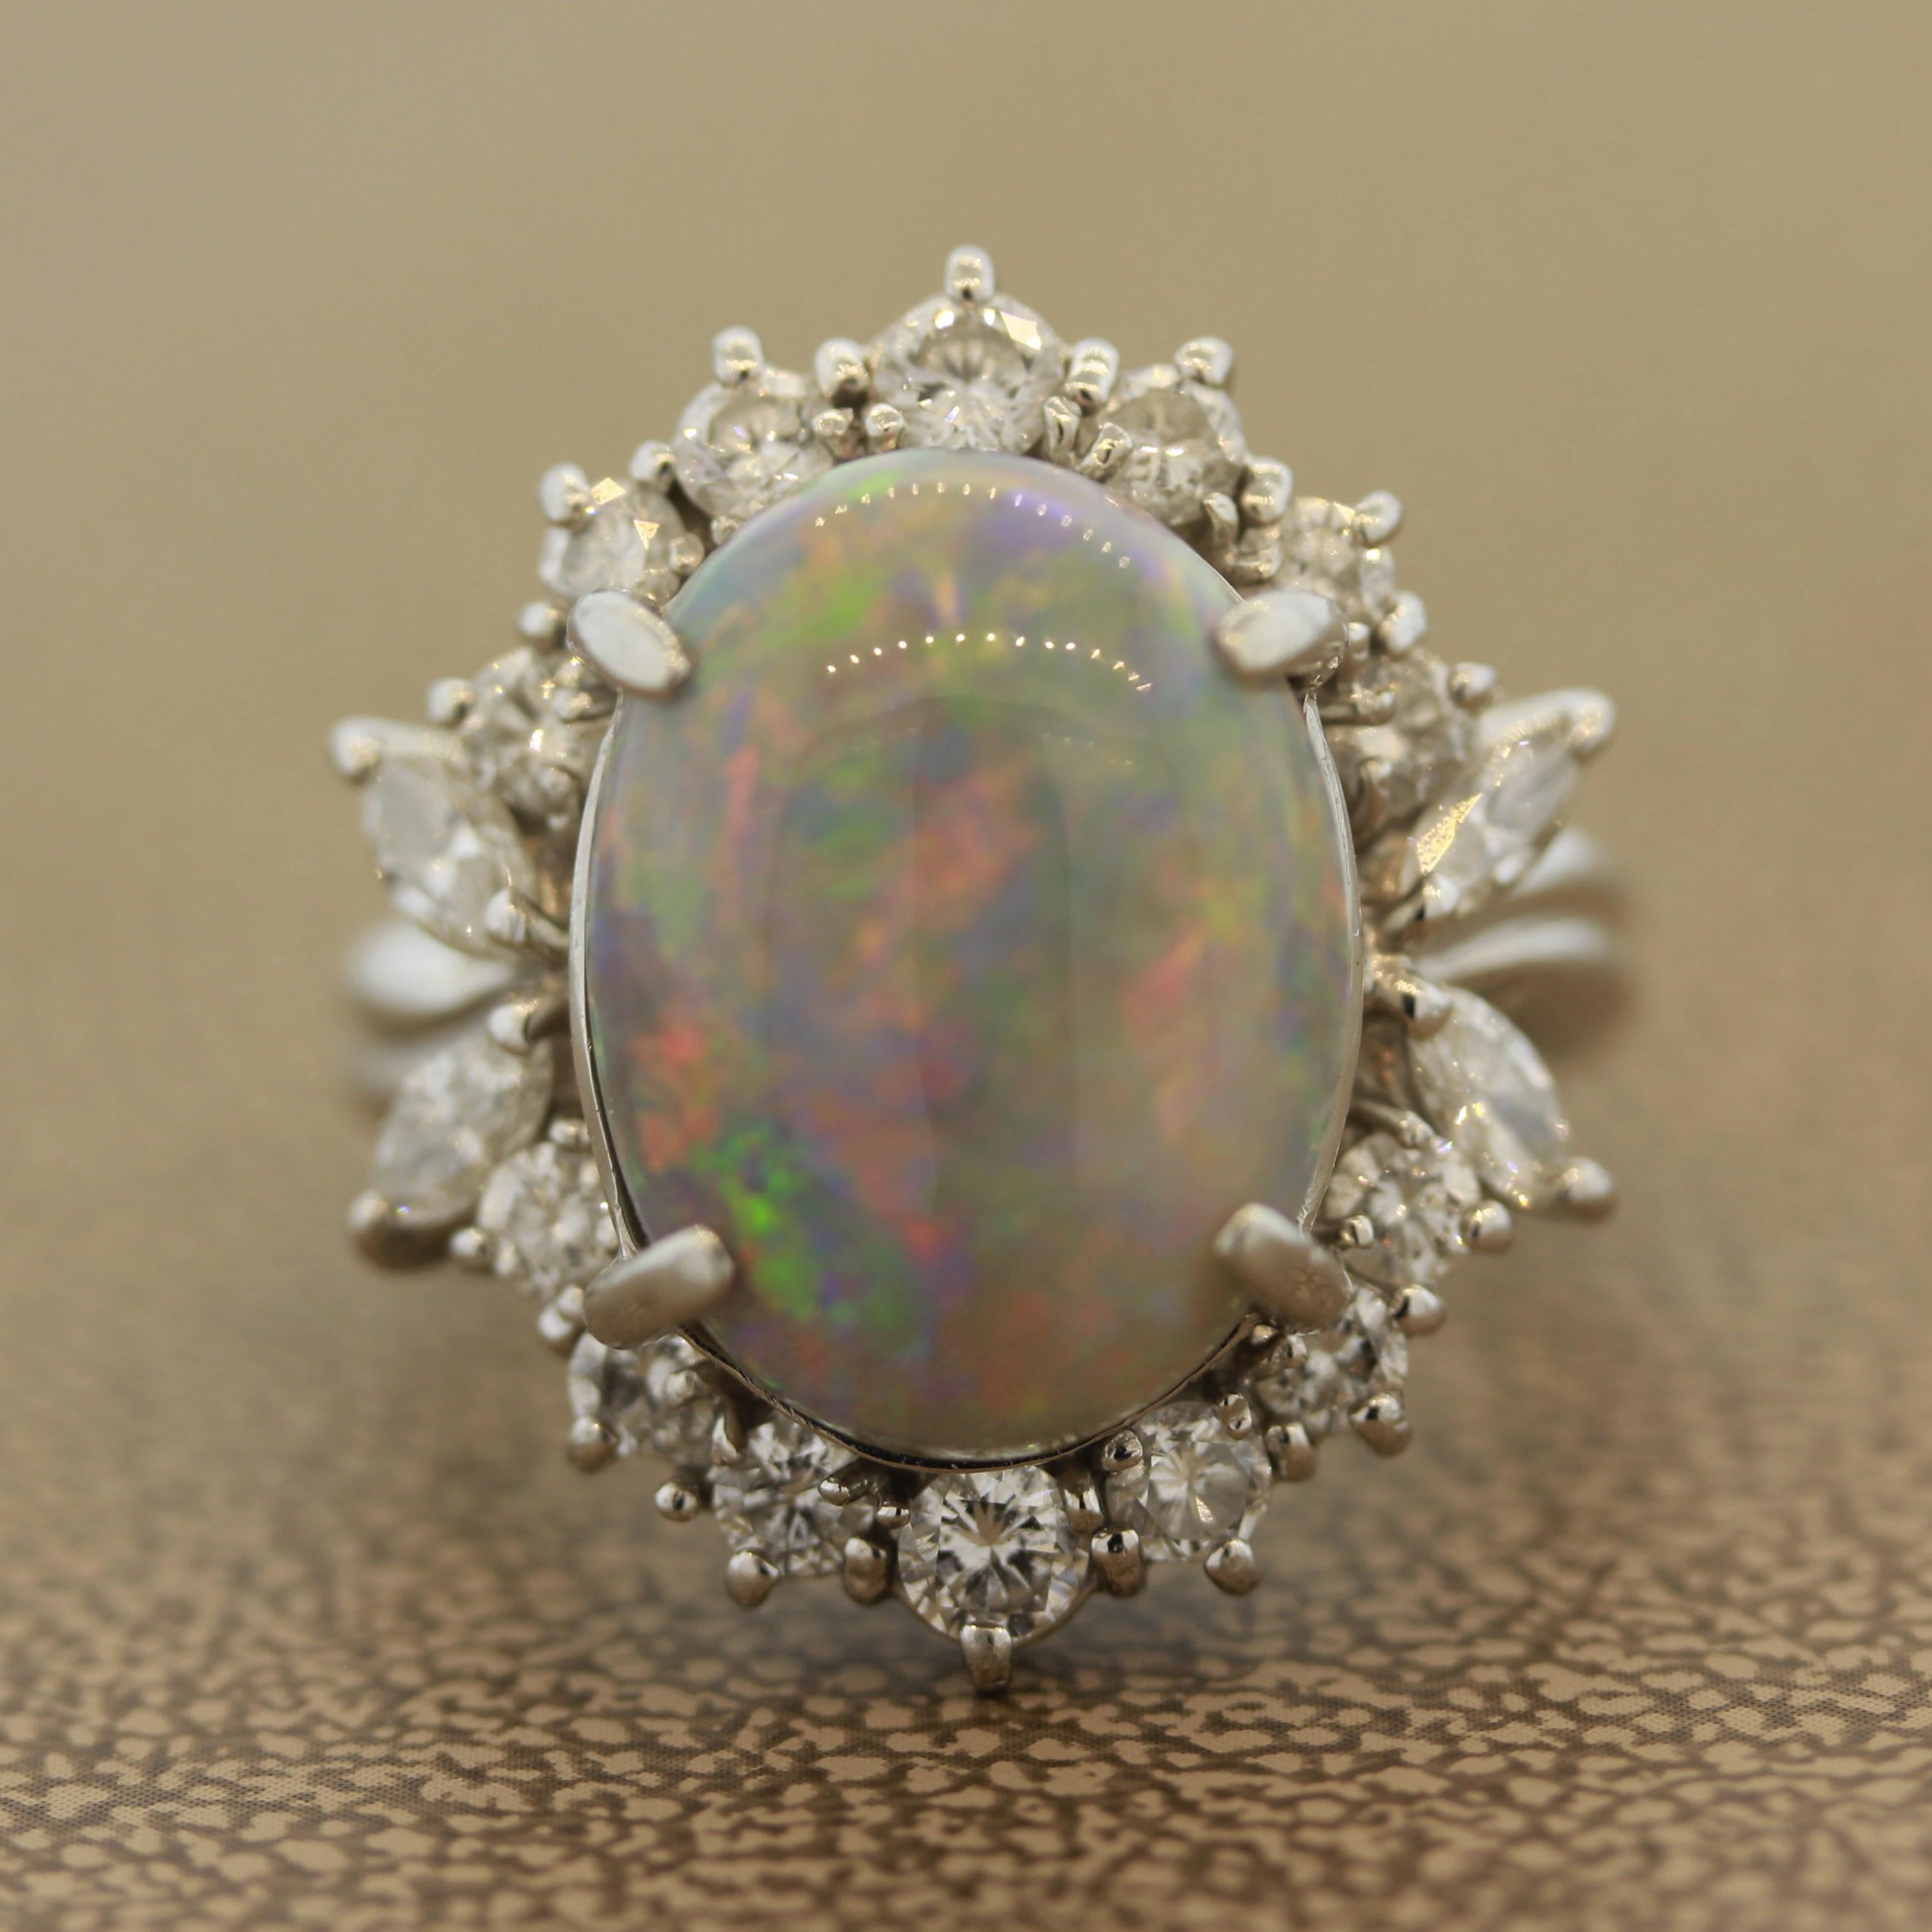 A special Australian opal, most likely from Lightning Ridge, takes center stage. It weighs 8.03 carats and has excellent play of color as the entire piece of opal is covered in flashes predominantly red and orange with greens and purples as well. It